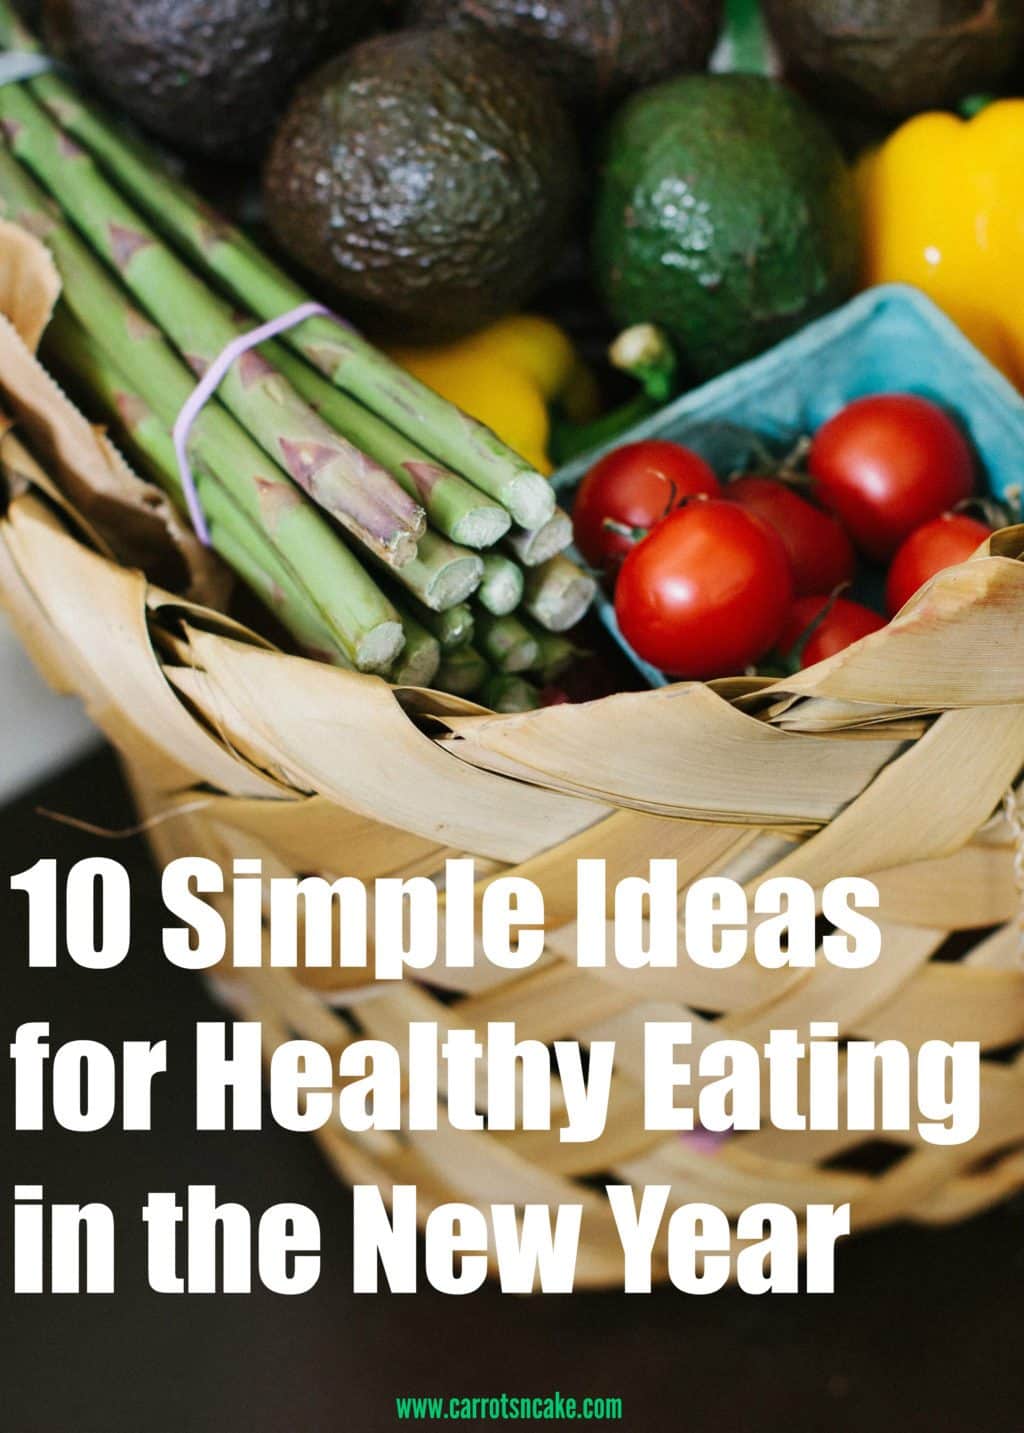 simple-ideas-for-healthy-eating-in-the-new-year